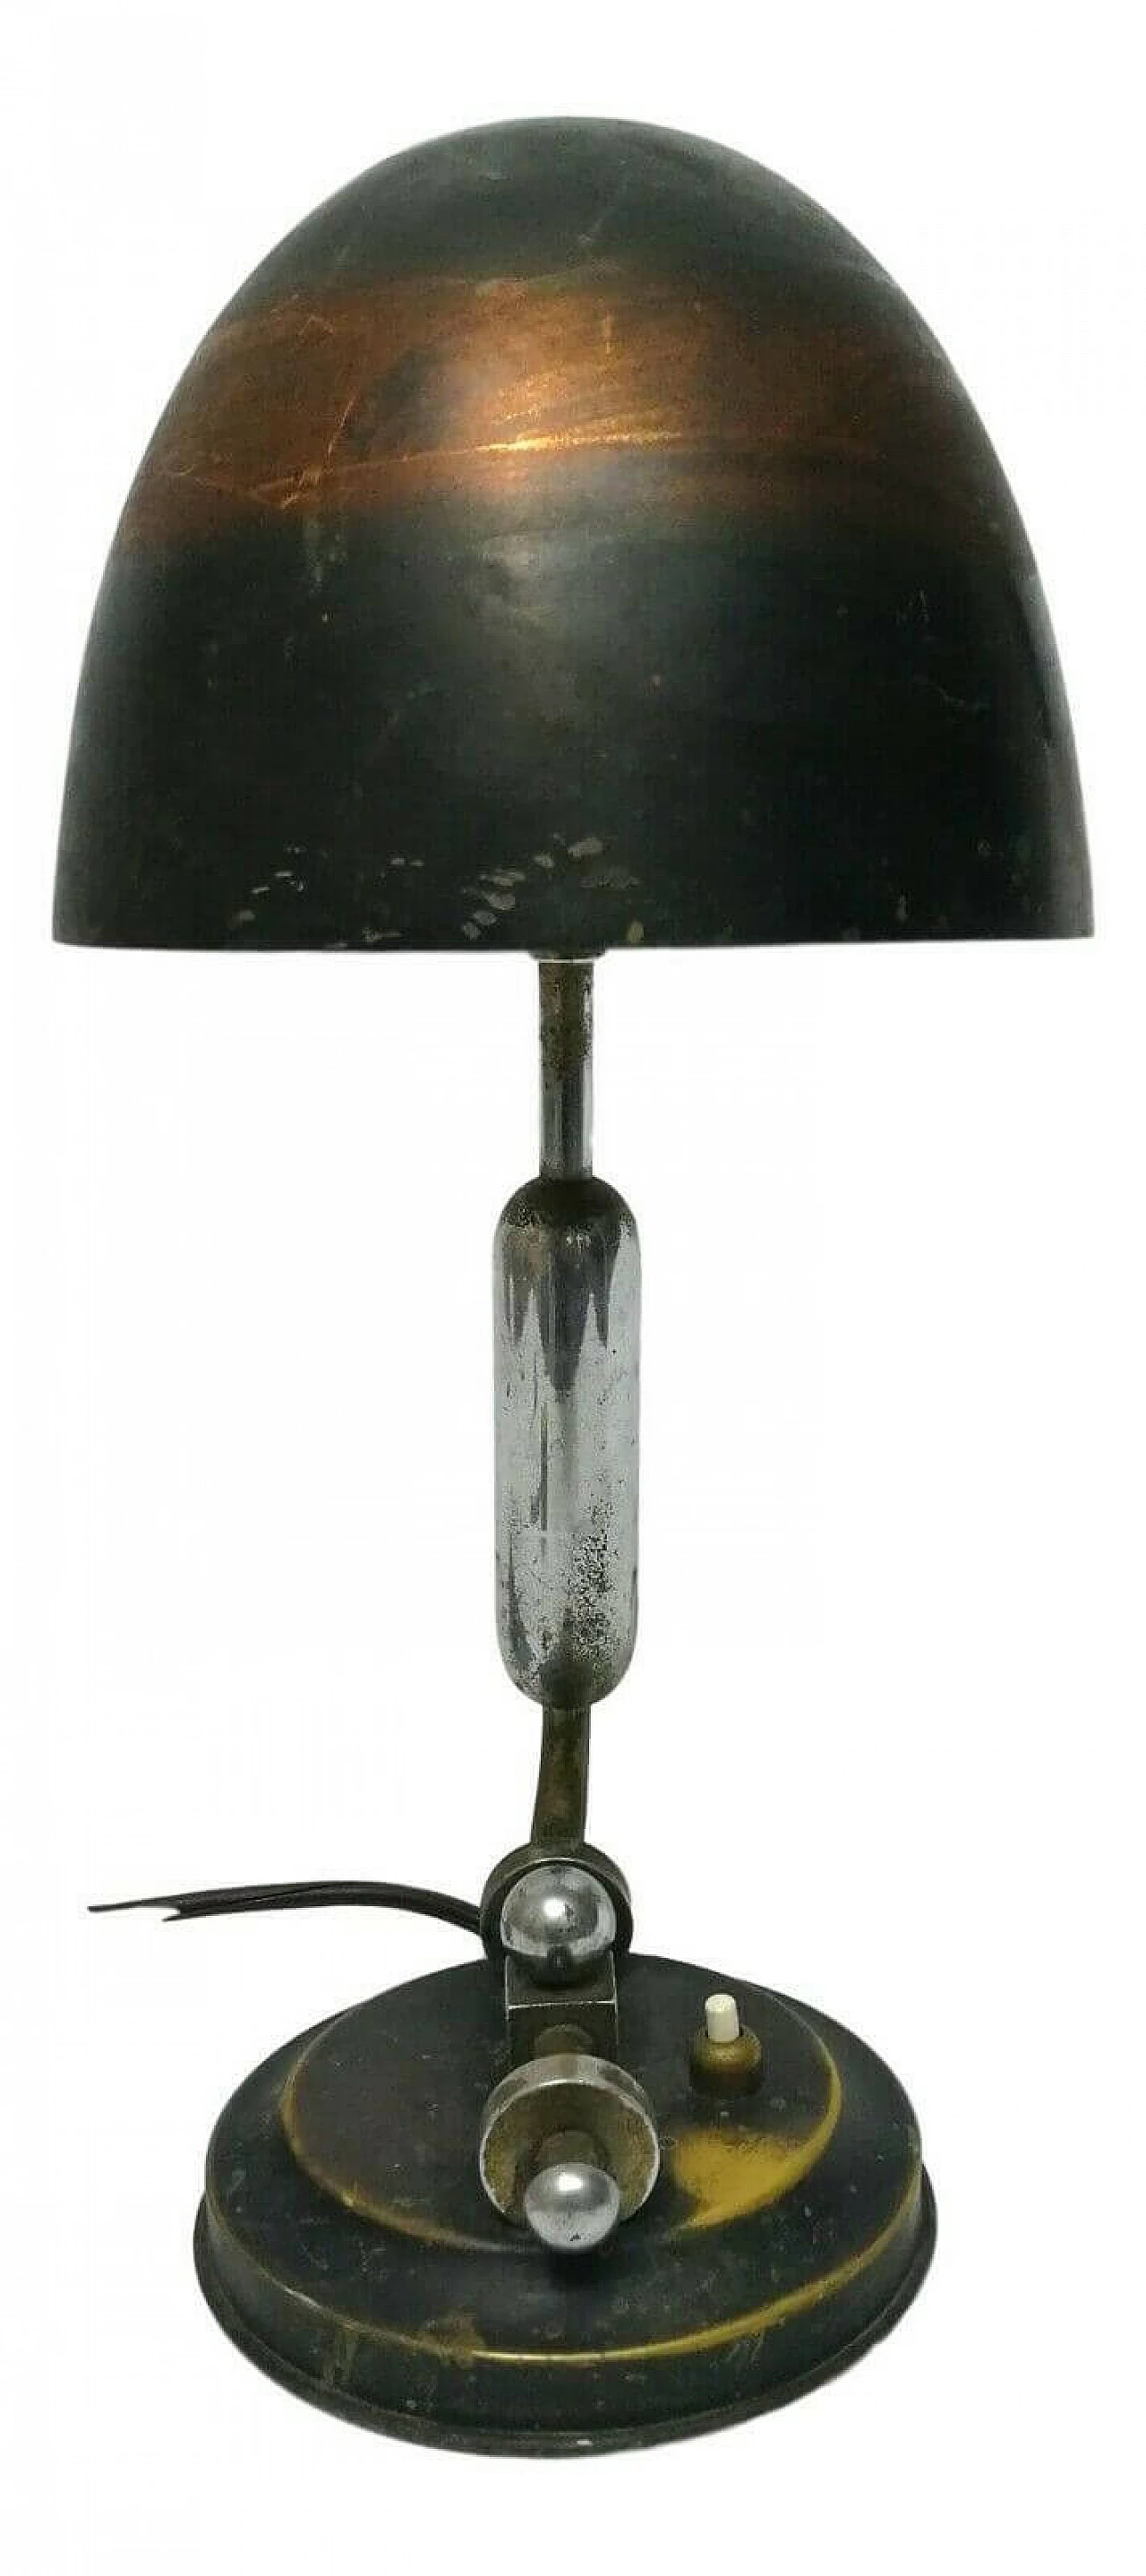 Bauhaus industrial table lamp by Anker Lyhne, 1950s 1163921